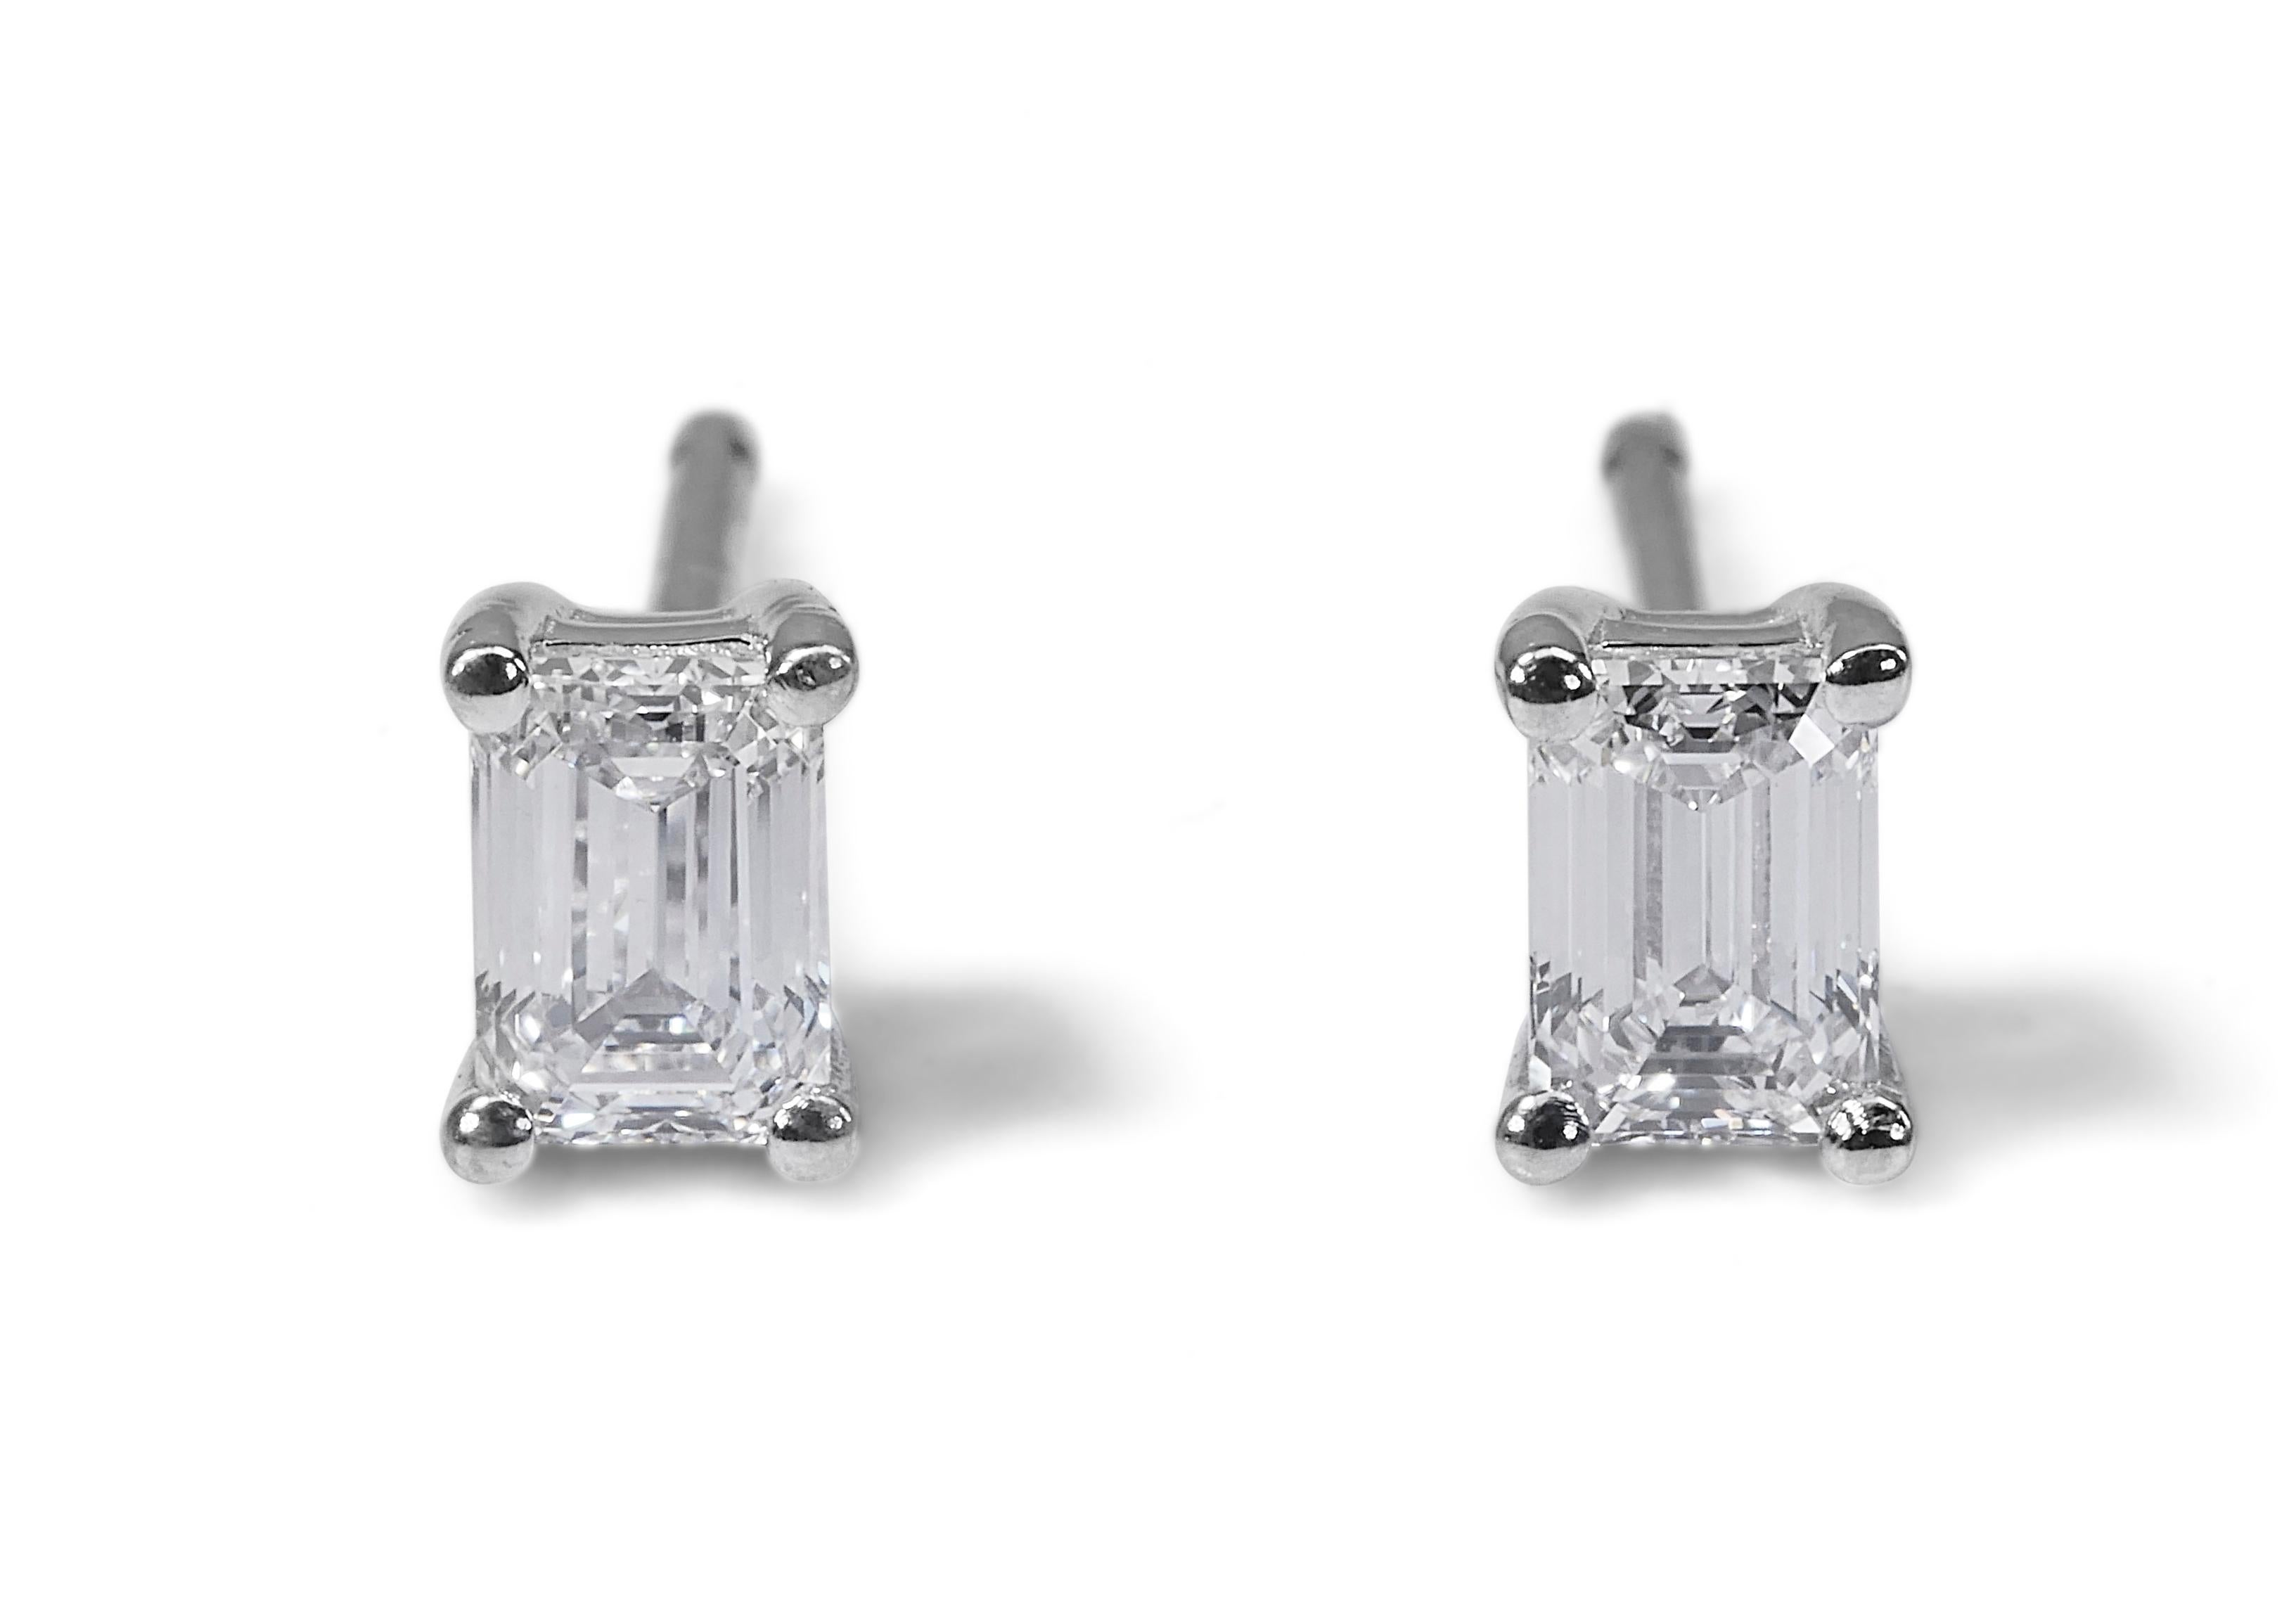 Classic 1.48ct Emerald-Cut Diamond Stud Earrings in 18k White Gold - GIA Certified

Elevate your style with these stunning diamond stud earrings, expertly crafted in 18k white gold. Each earring features a brilliant emerald-cut diamond, collectively